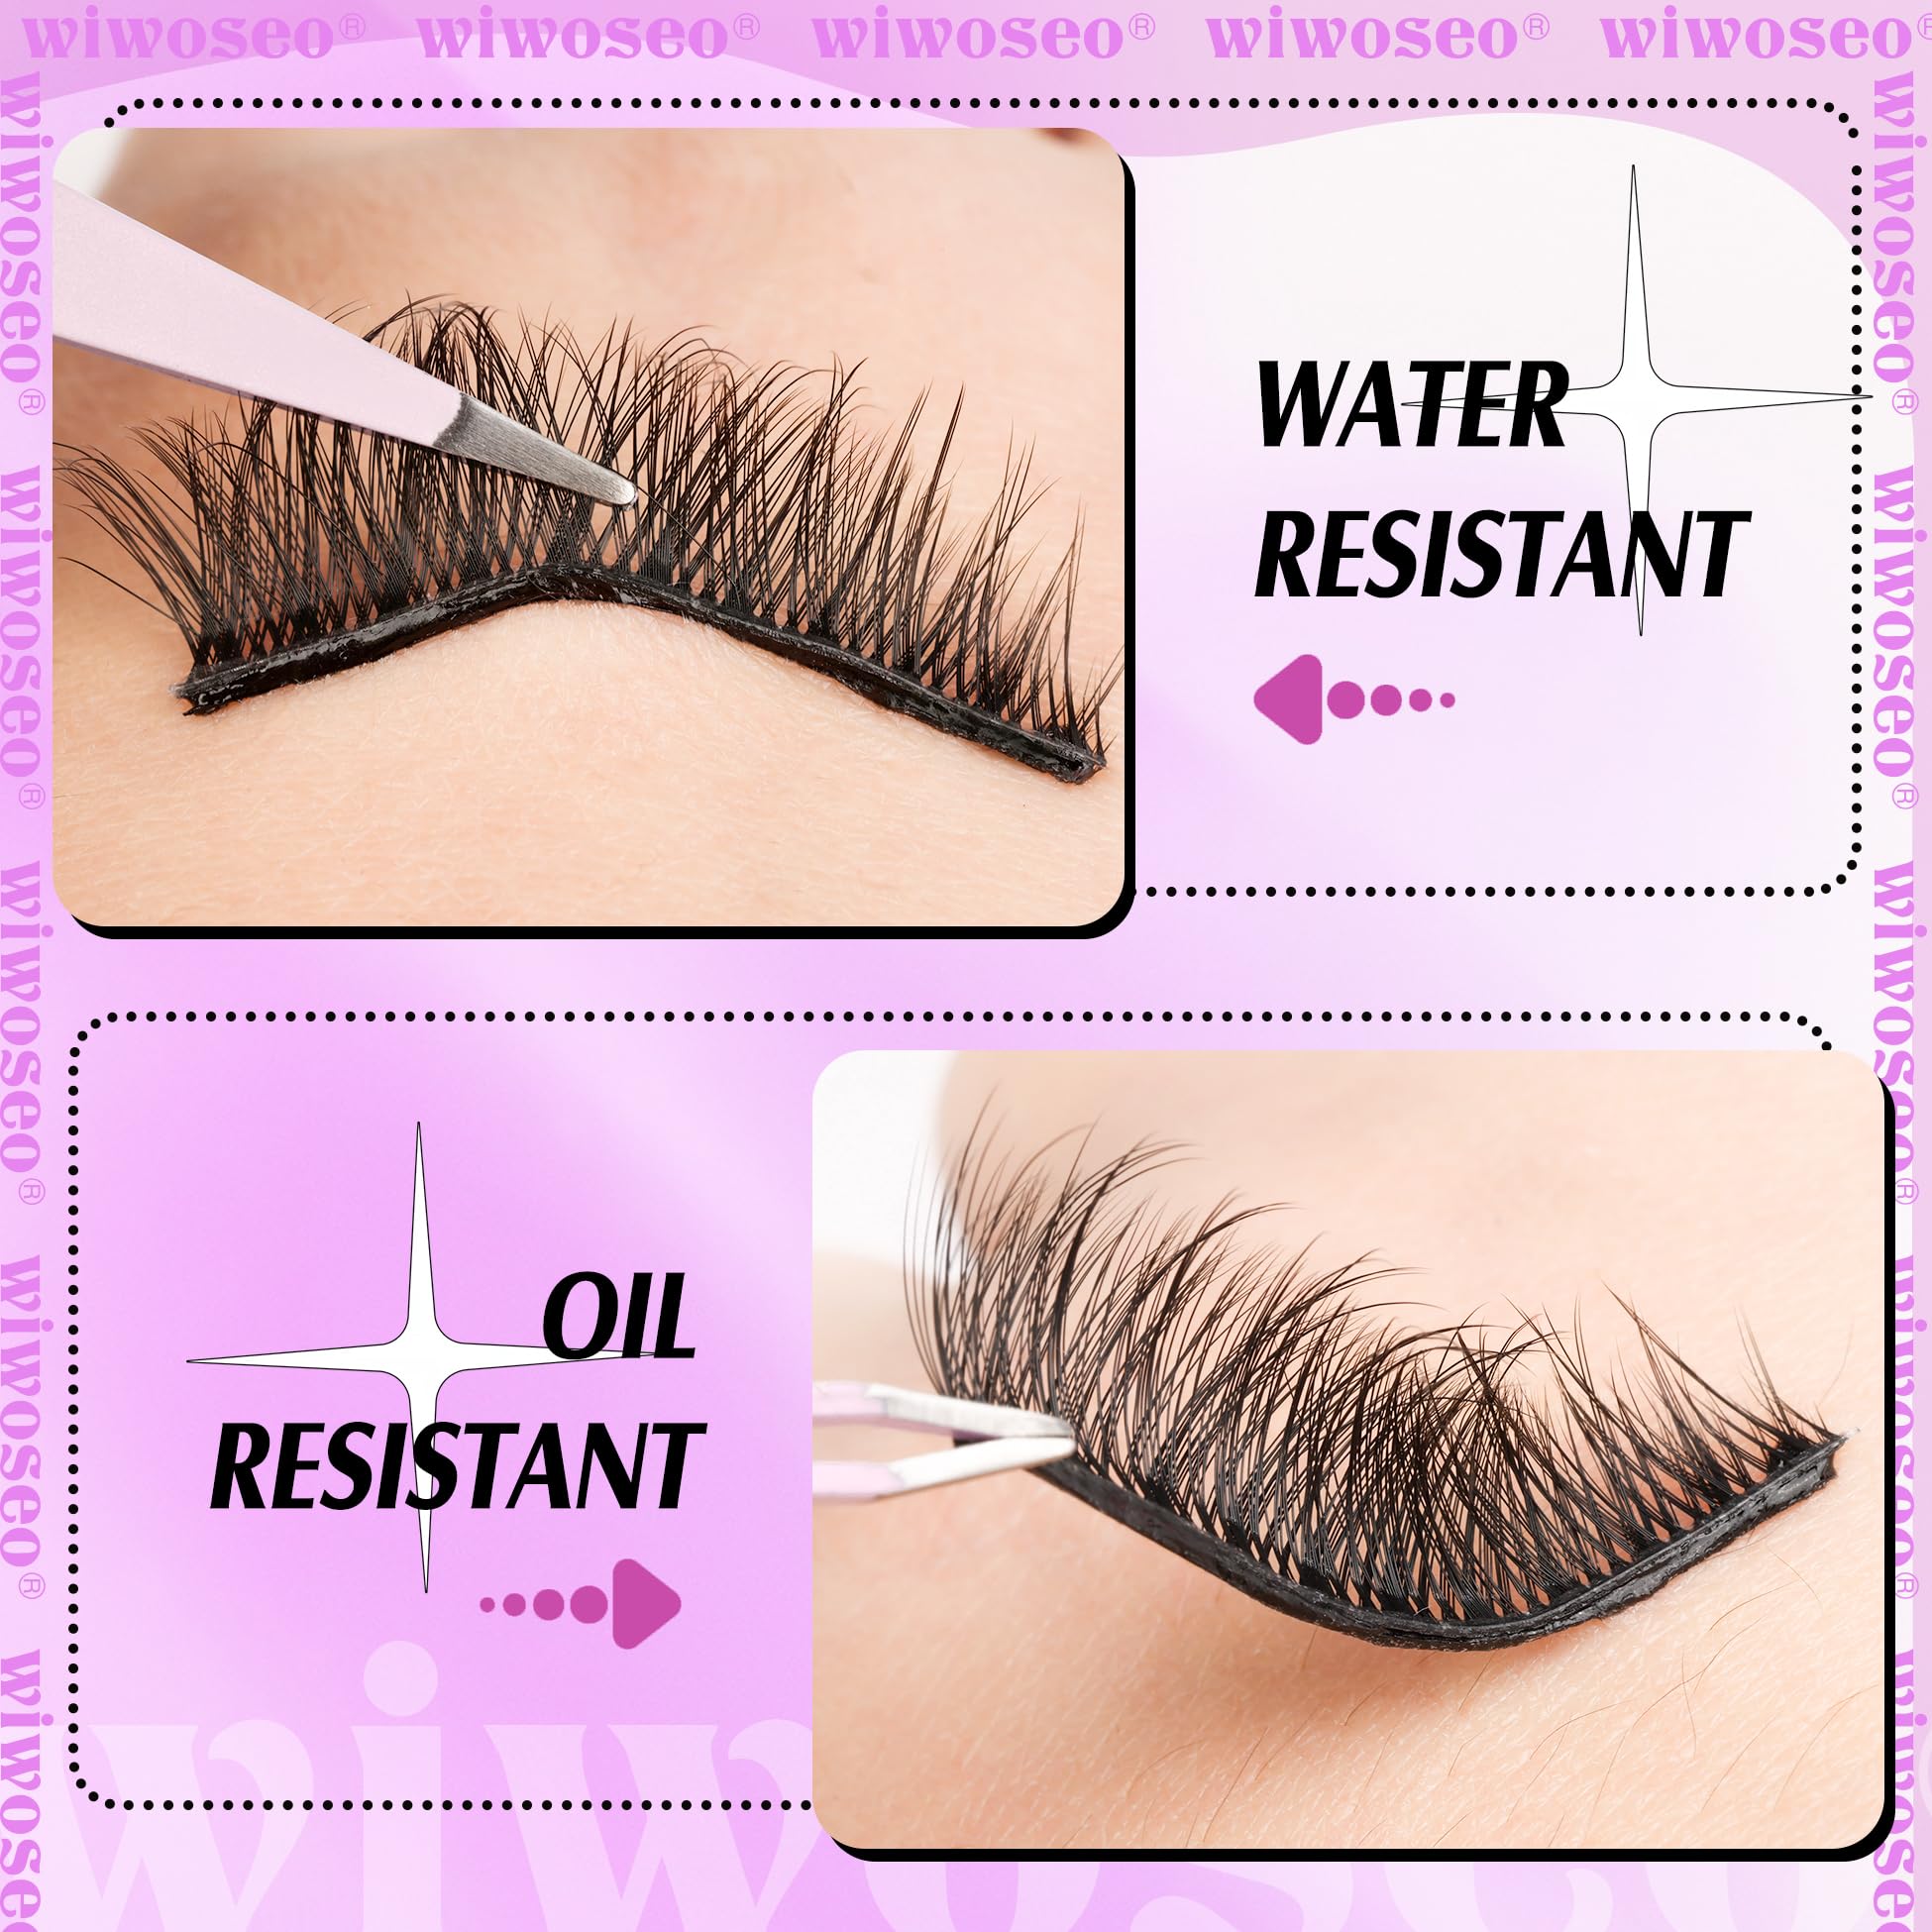 wiwoseo False Eyelashes Colorful Russian Strip Lashes Colored Faux Mink Lashes Natural Wispy Fluffy 18MM 3D Effect Color Fake Eyelashes for Festival 10 Pairs Pack